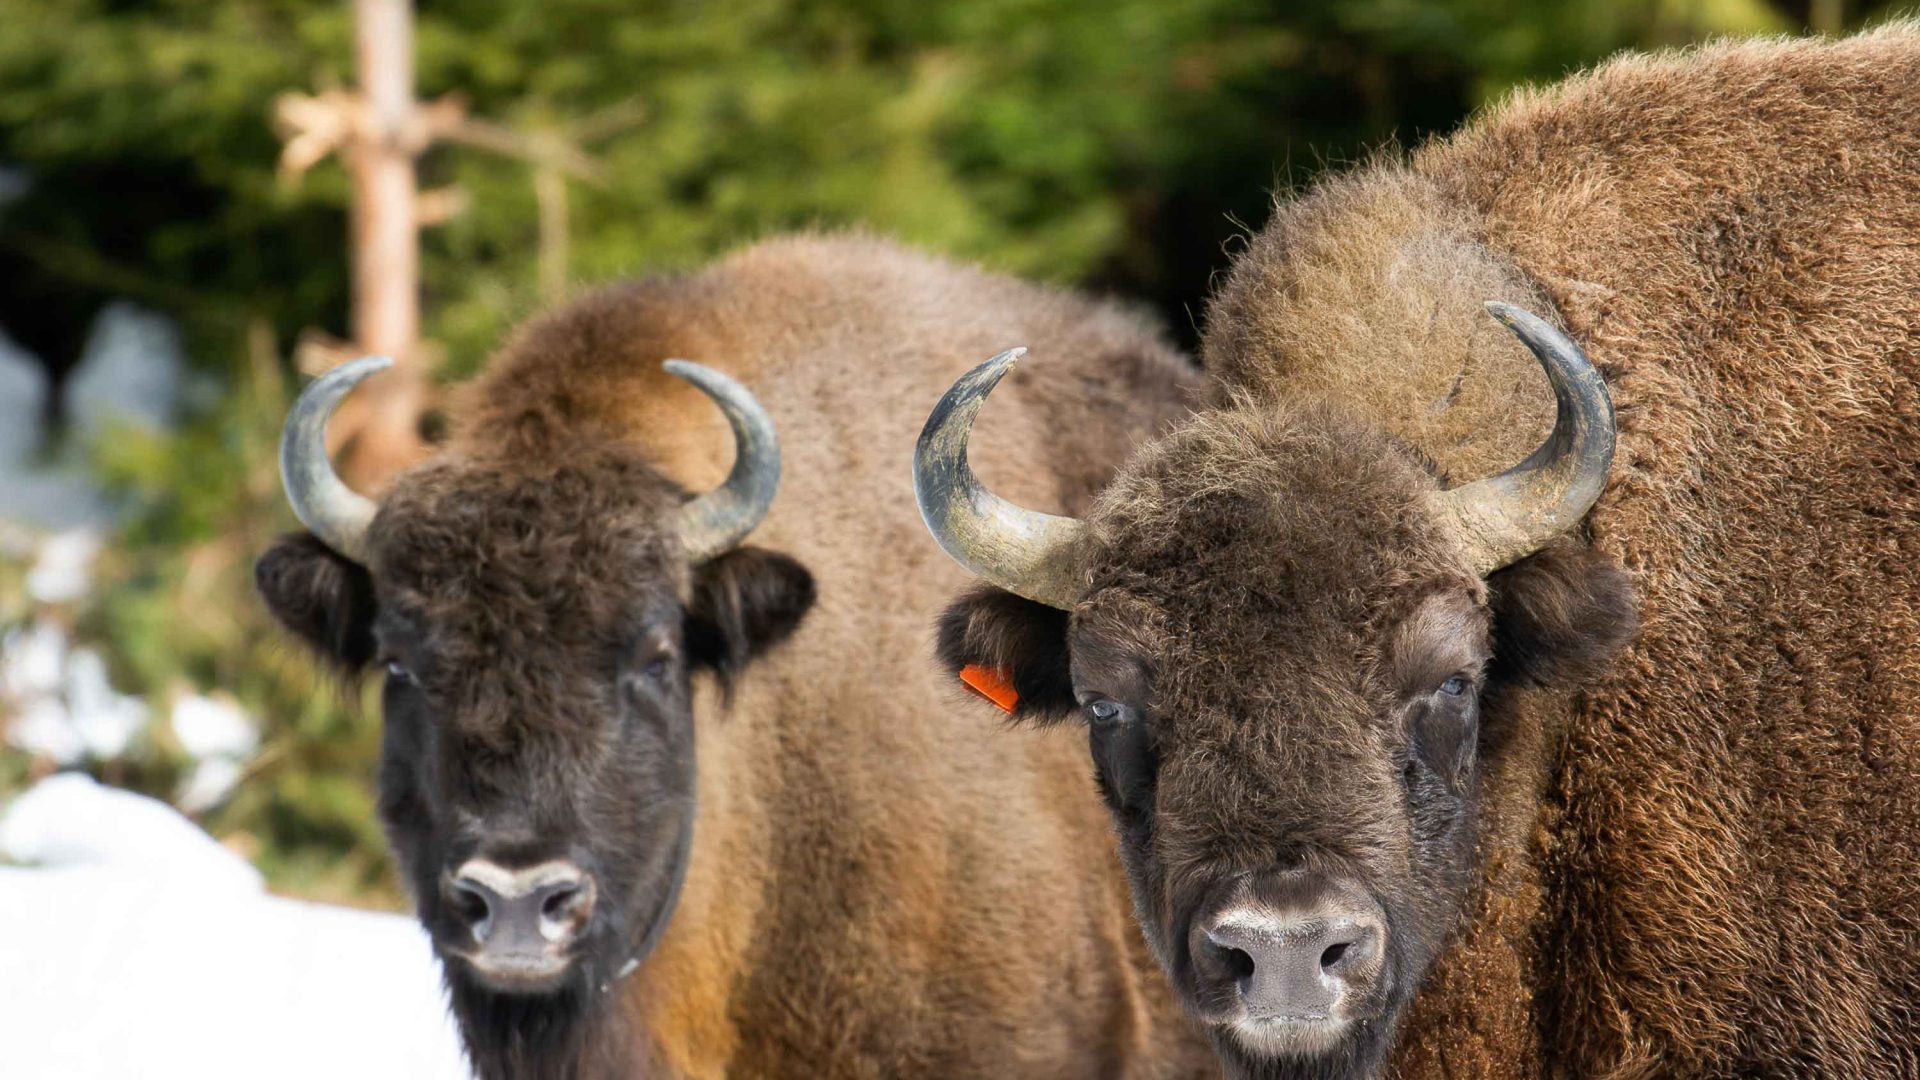 Two bison look at the camera.